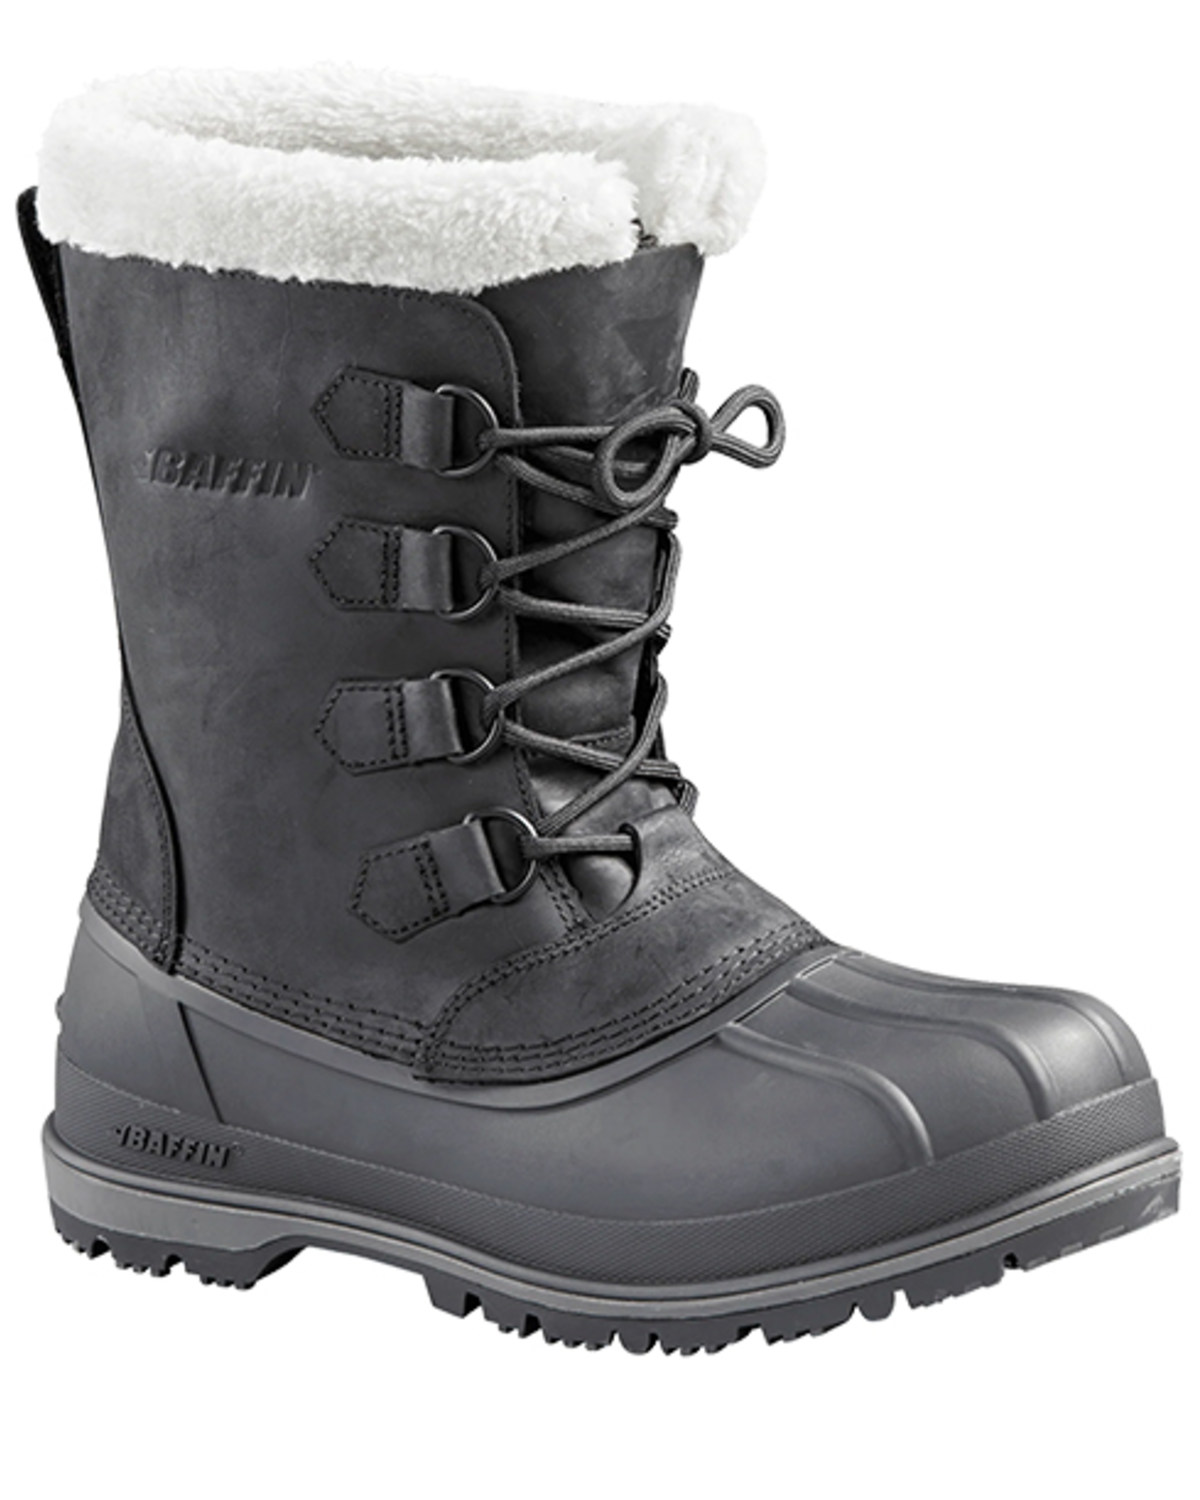 Baffin Men's Canada Insulated Waterproof Boots - Soft Toe